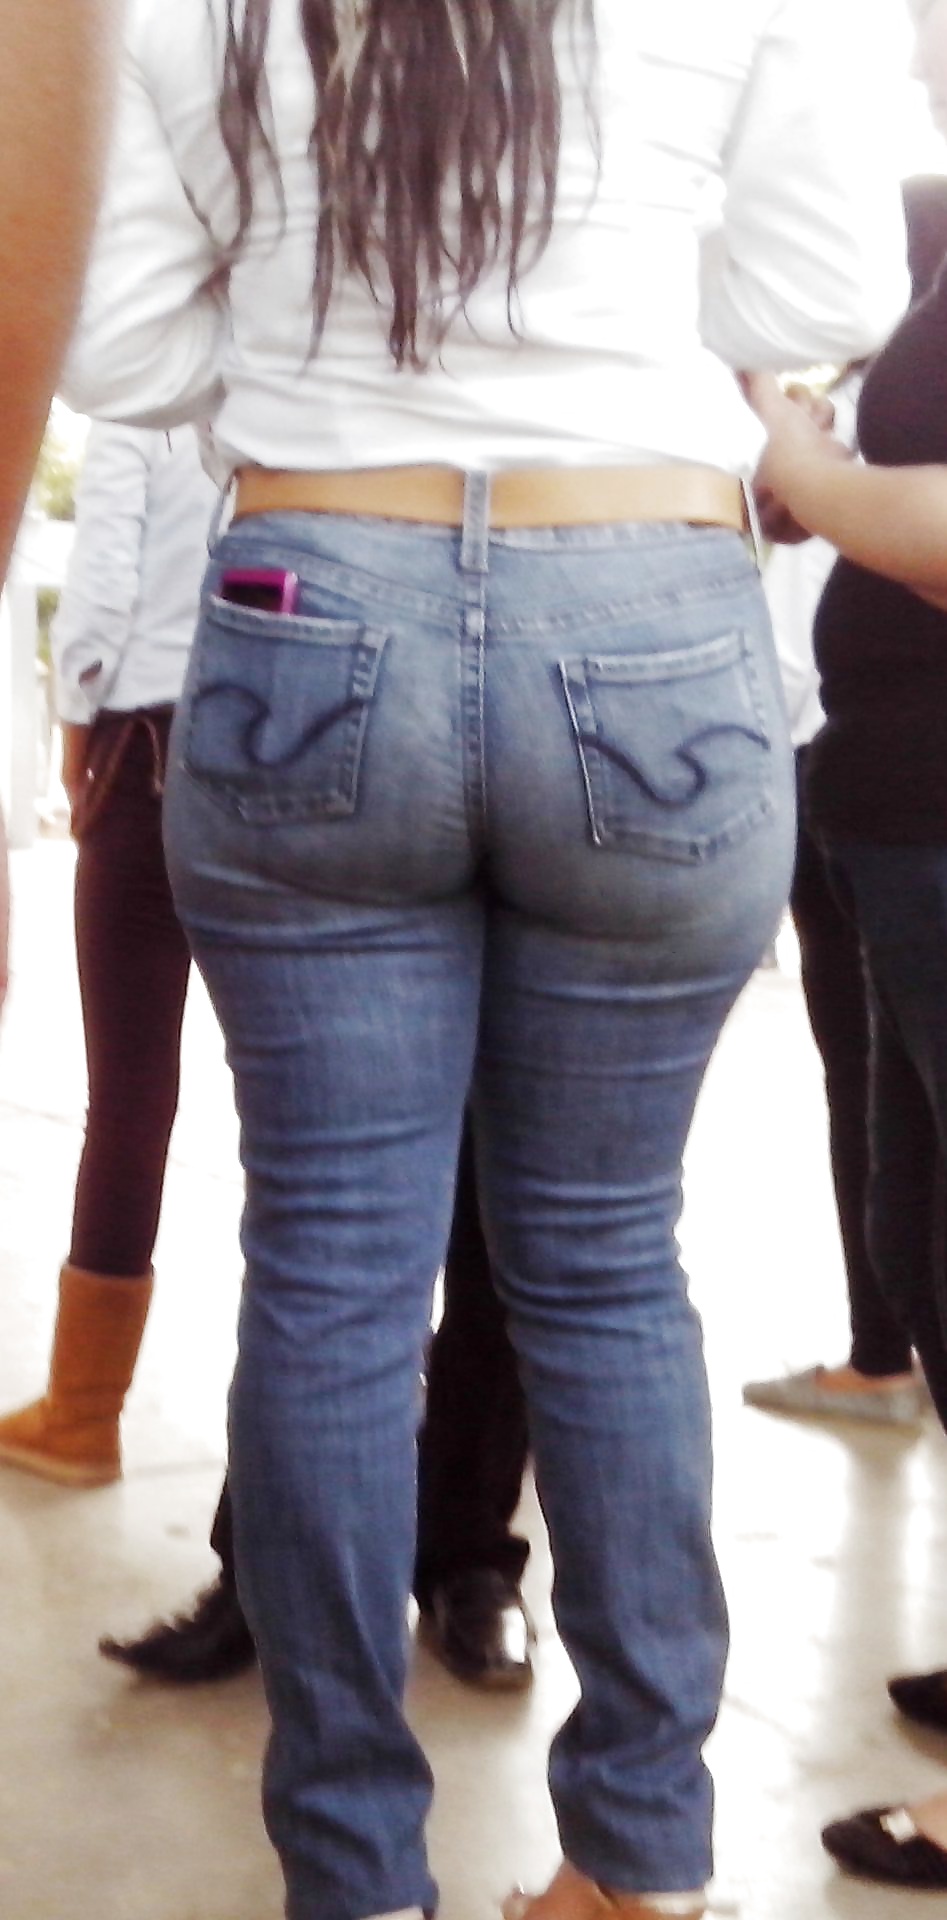 Tight jeans #12488133